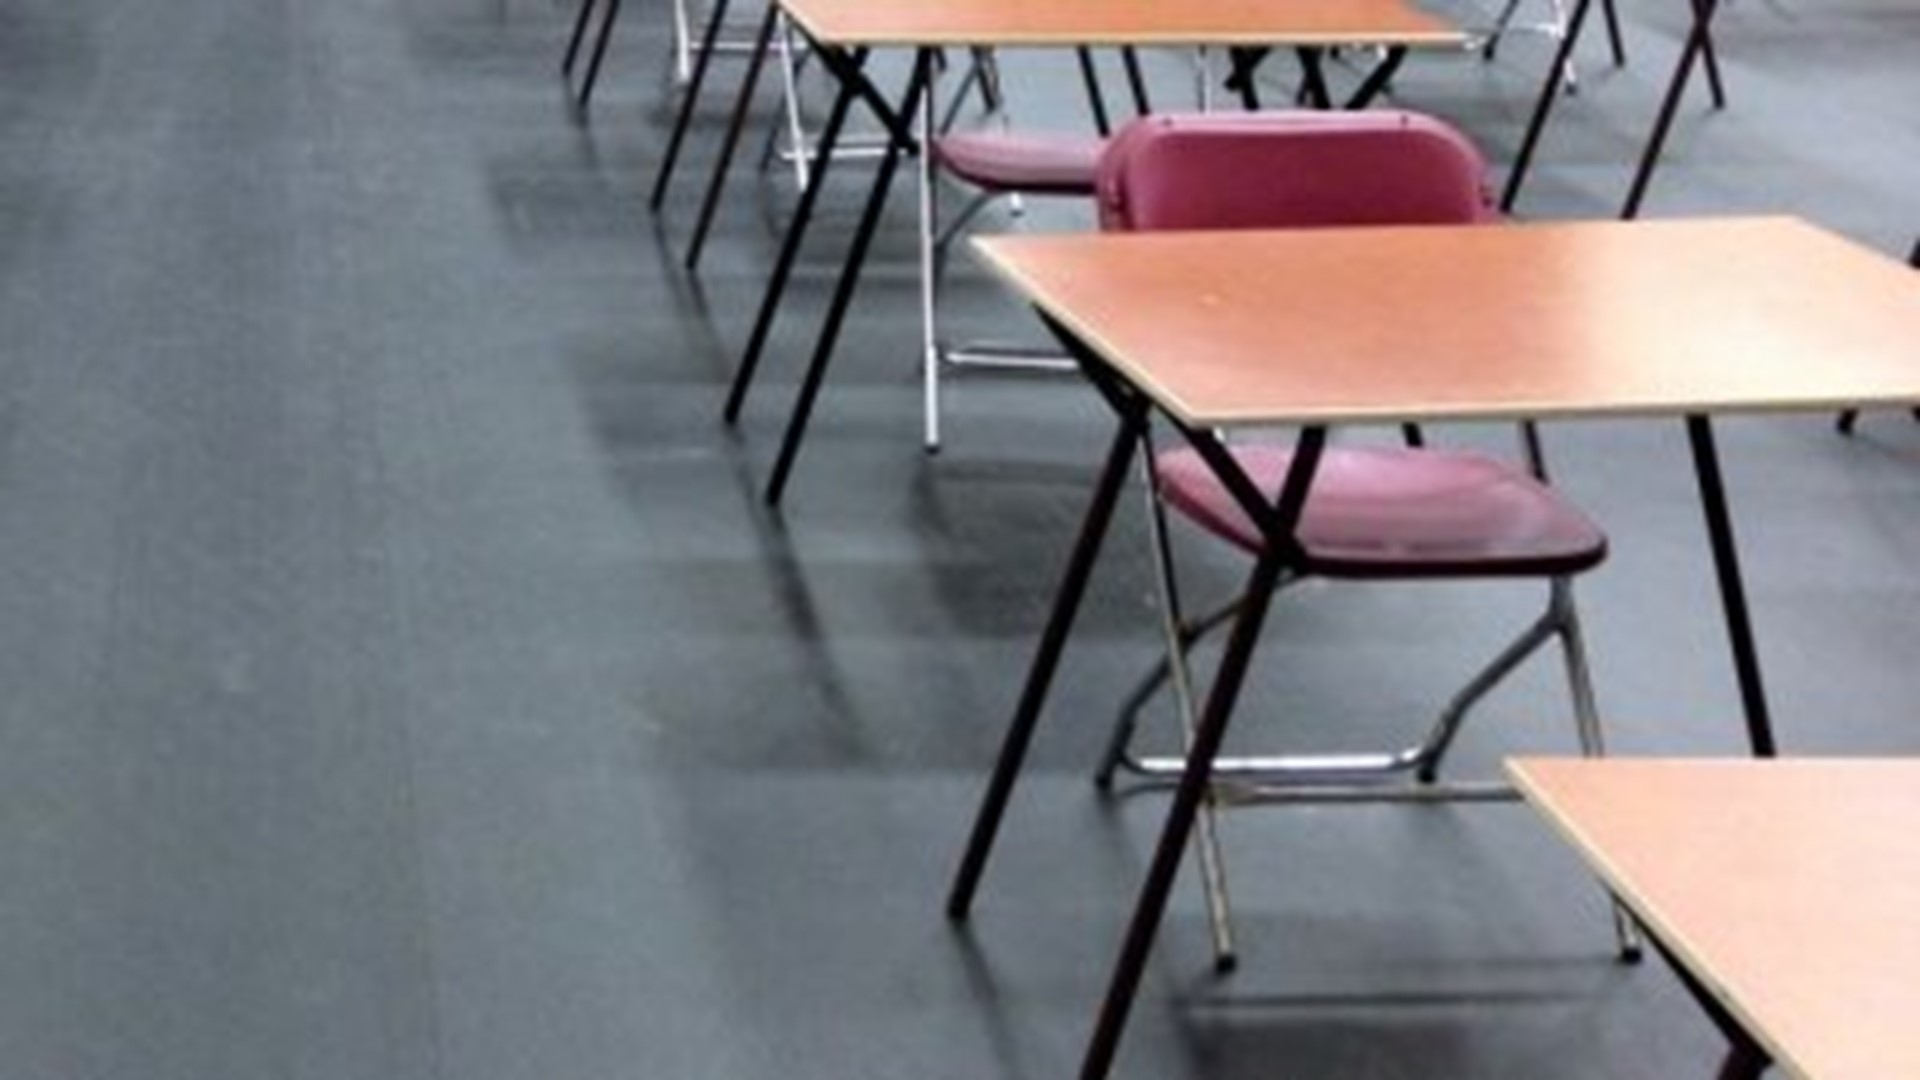 Pennsylvania has modified its recommendations as the CDC has updated guidance for schools to determine when to bring students back to class.